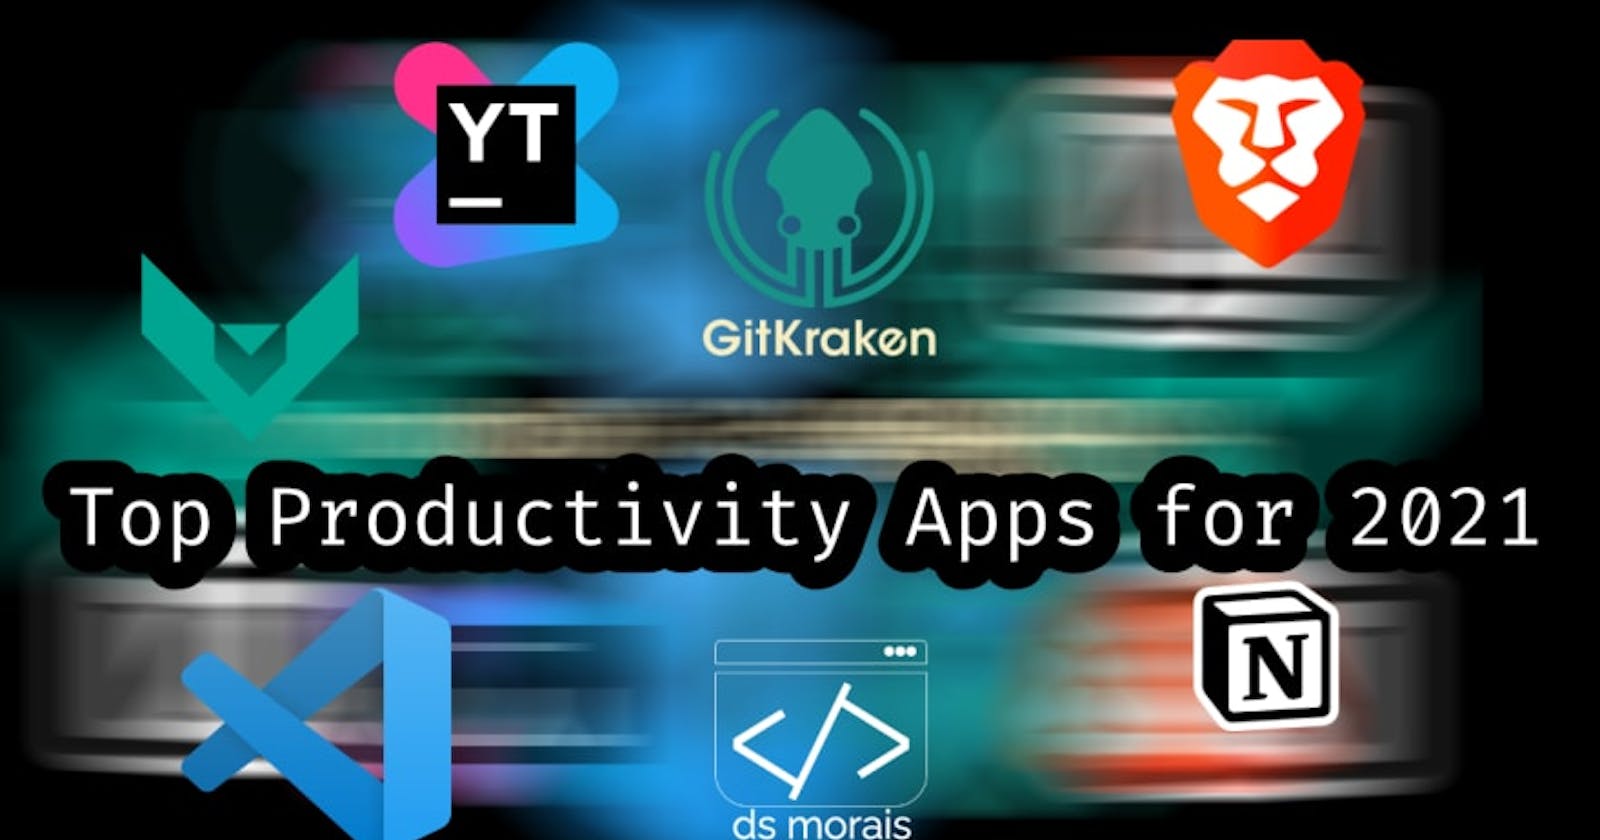 Top 2021 Productivity Apps